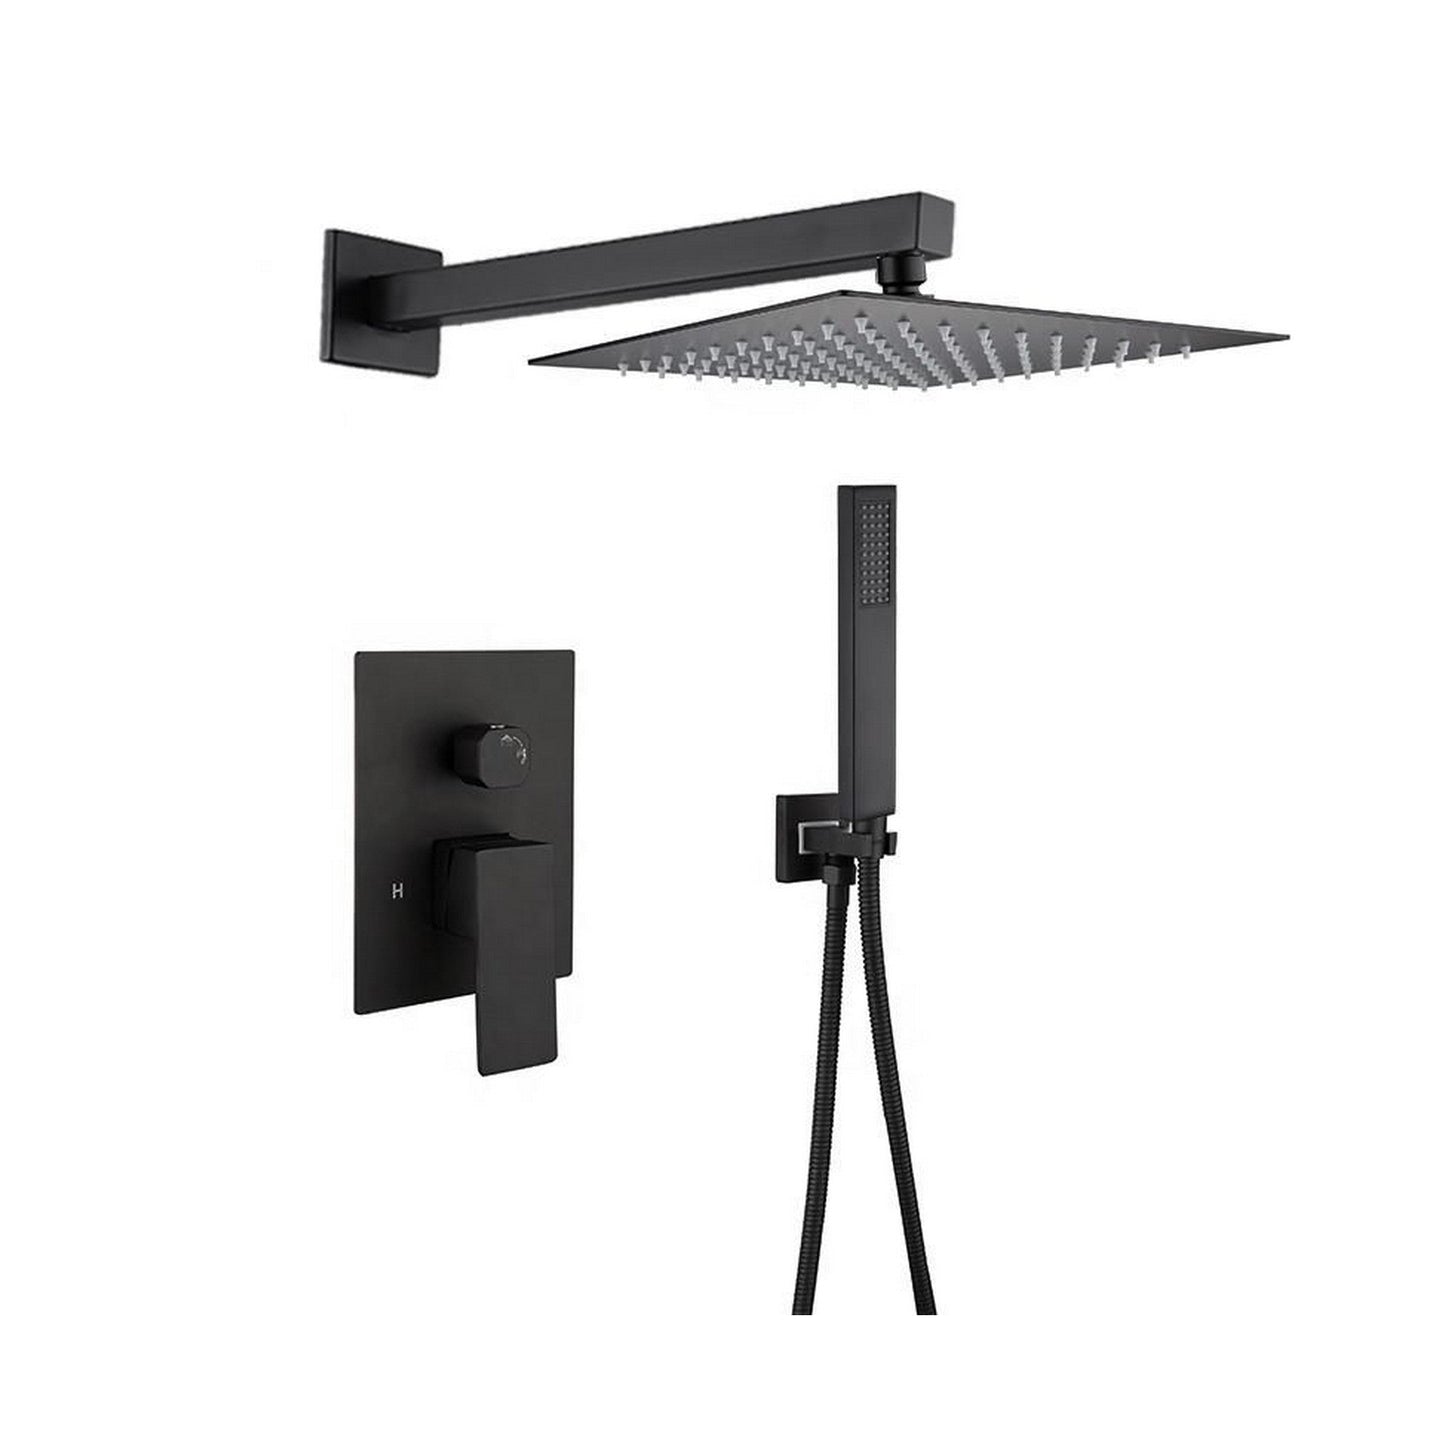 Ratel Matte Black Wall-Mounted Shower System With 10" Square Rainfall Shower Head and Handheld Shower